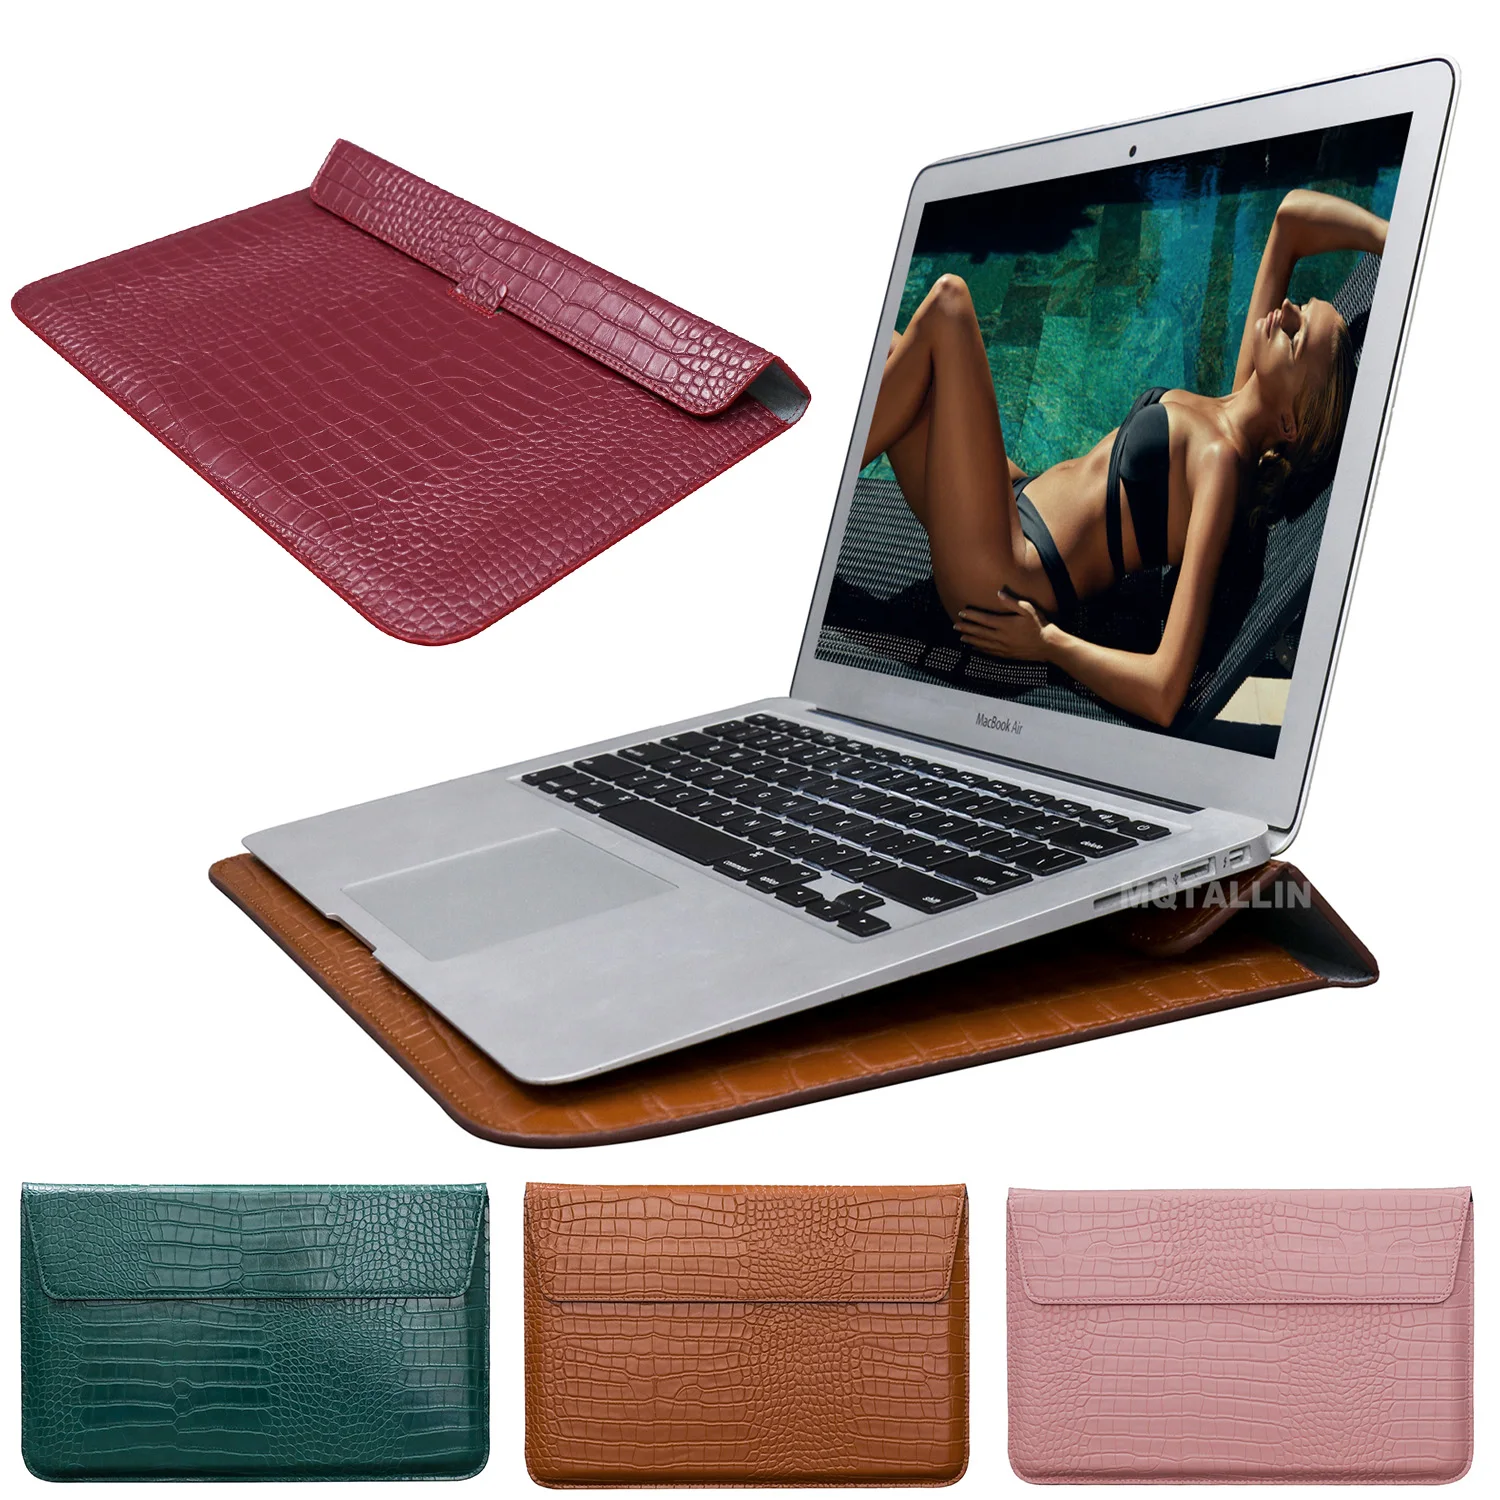 Mail sack Leather Bag Cover,For Apple macbook Pro Retina Air 11